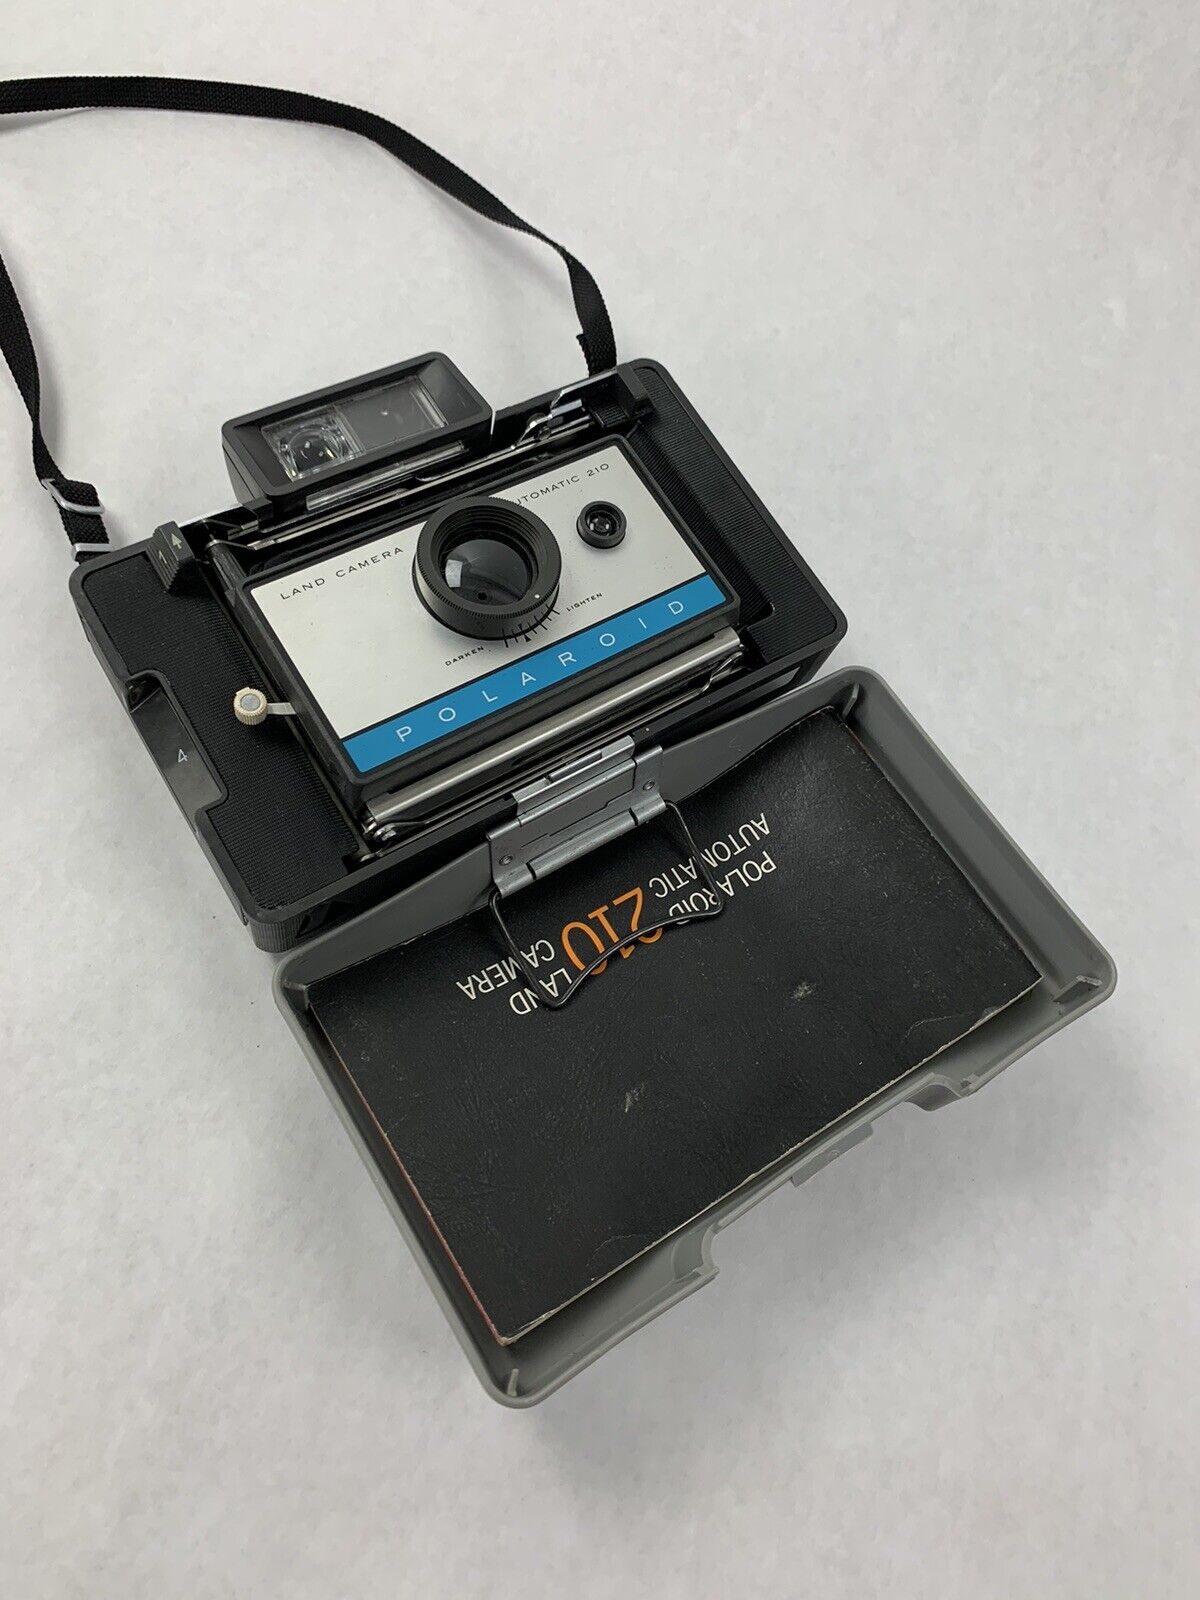 Vintage Polaroid Automatic 210 Land Camera with Case and Manual